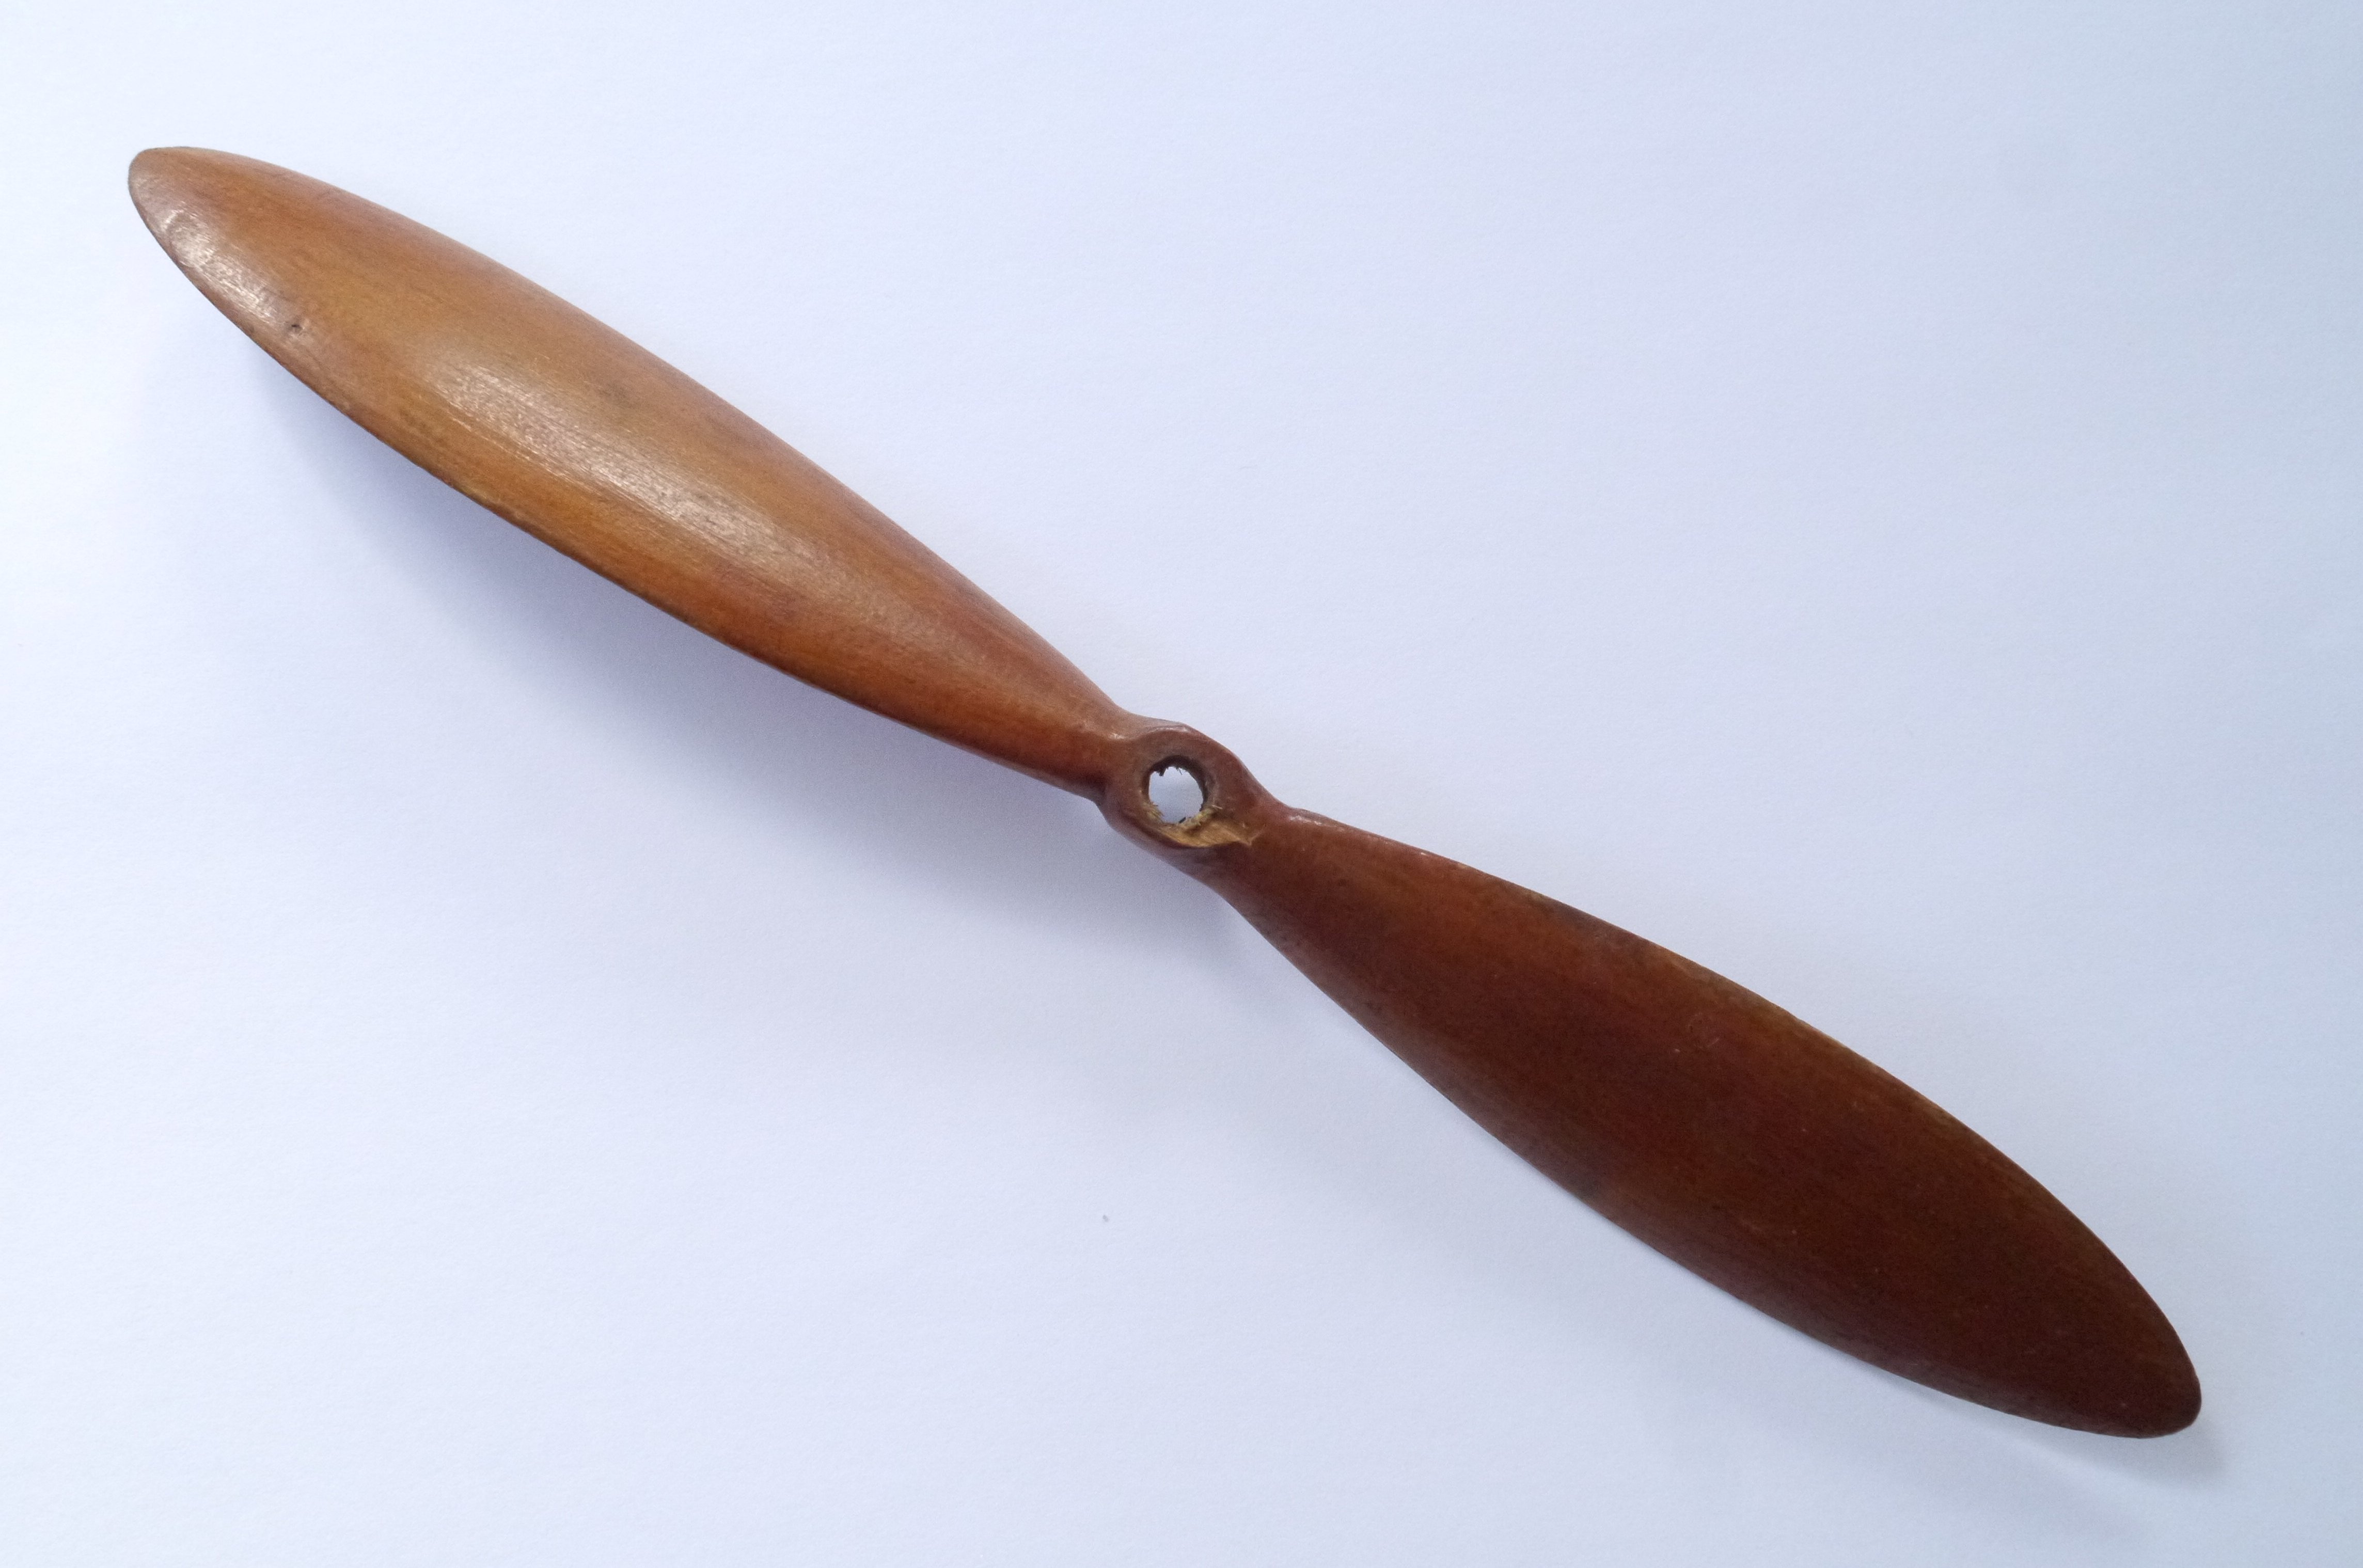 A wooden model aeroplane propeller hand carved by Clem. Length 252mm.